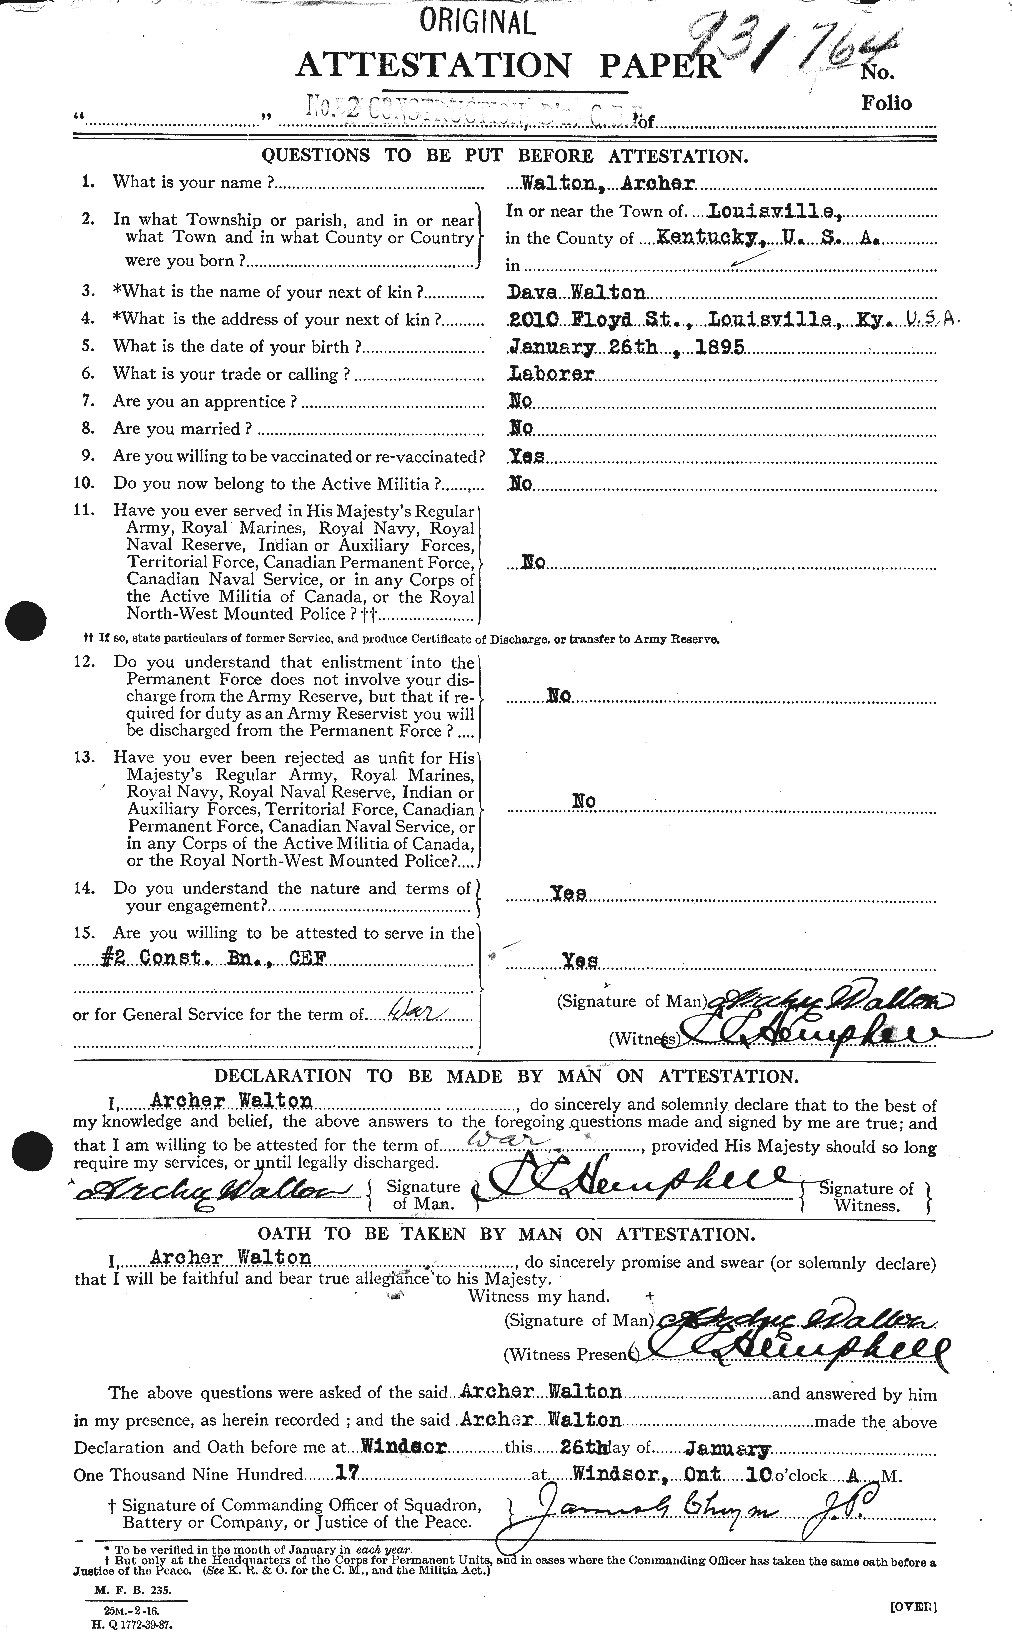 Personnel Records of the First World War - CEF 655513a